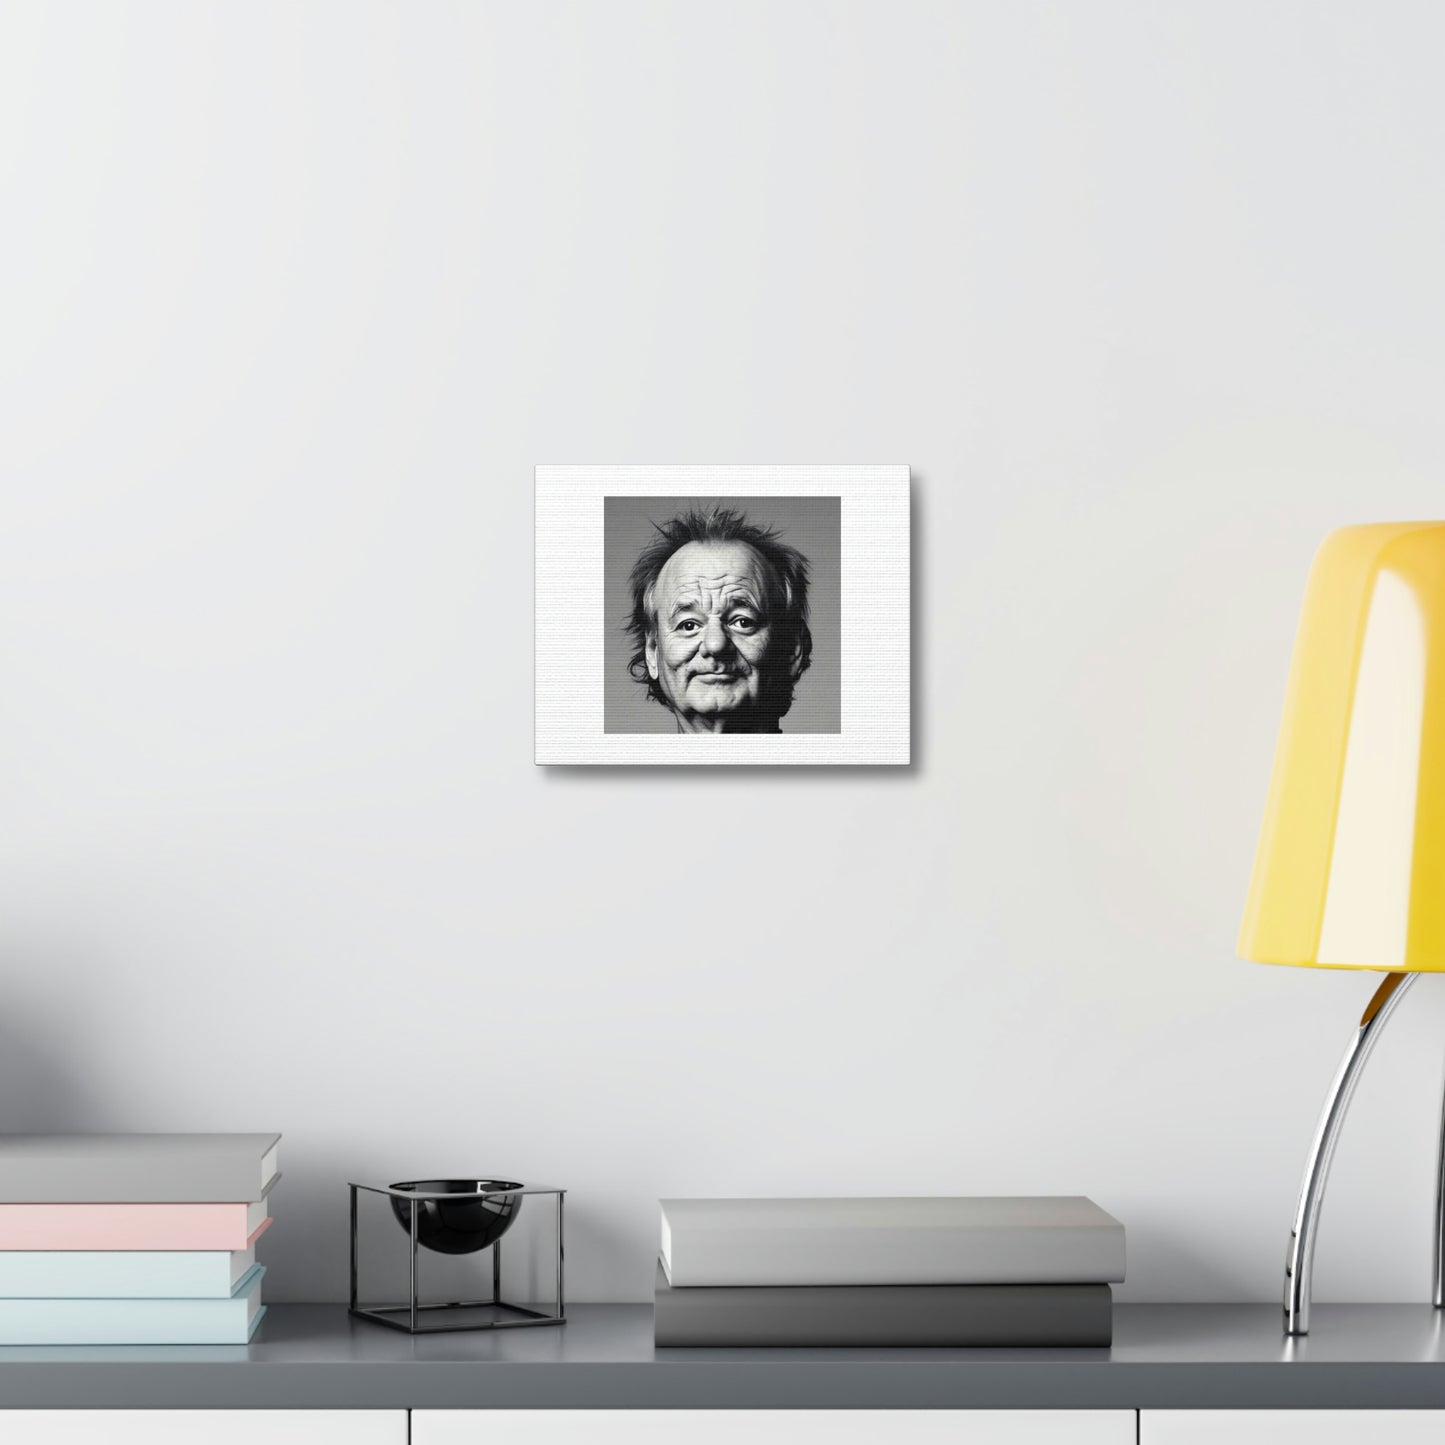 Bill Murray USA President Black And White Digital Art 'Designed by AI' on Canvas